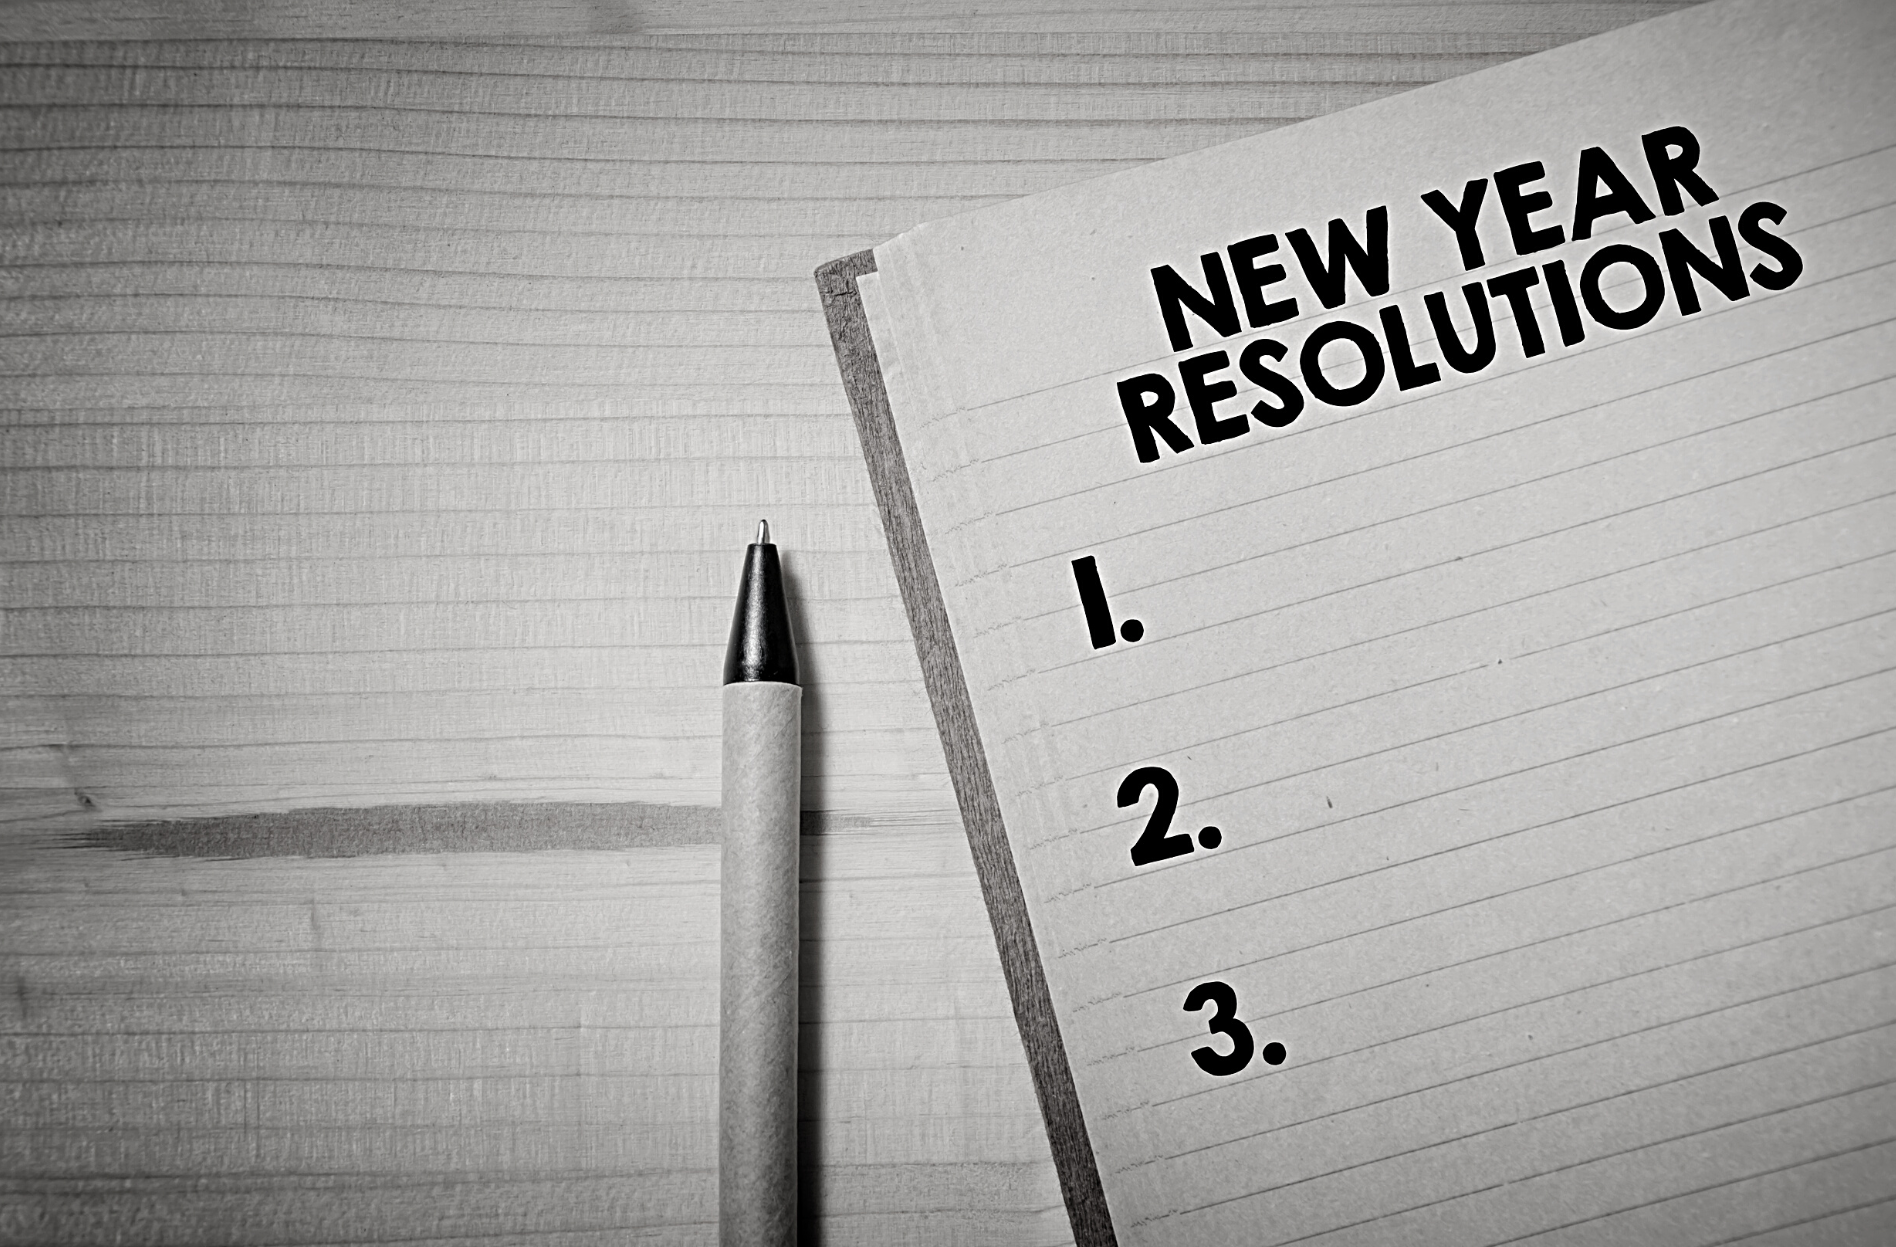 Why The Birds Papaya Doesn't Believe in New Year's Resolutions